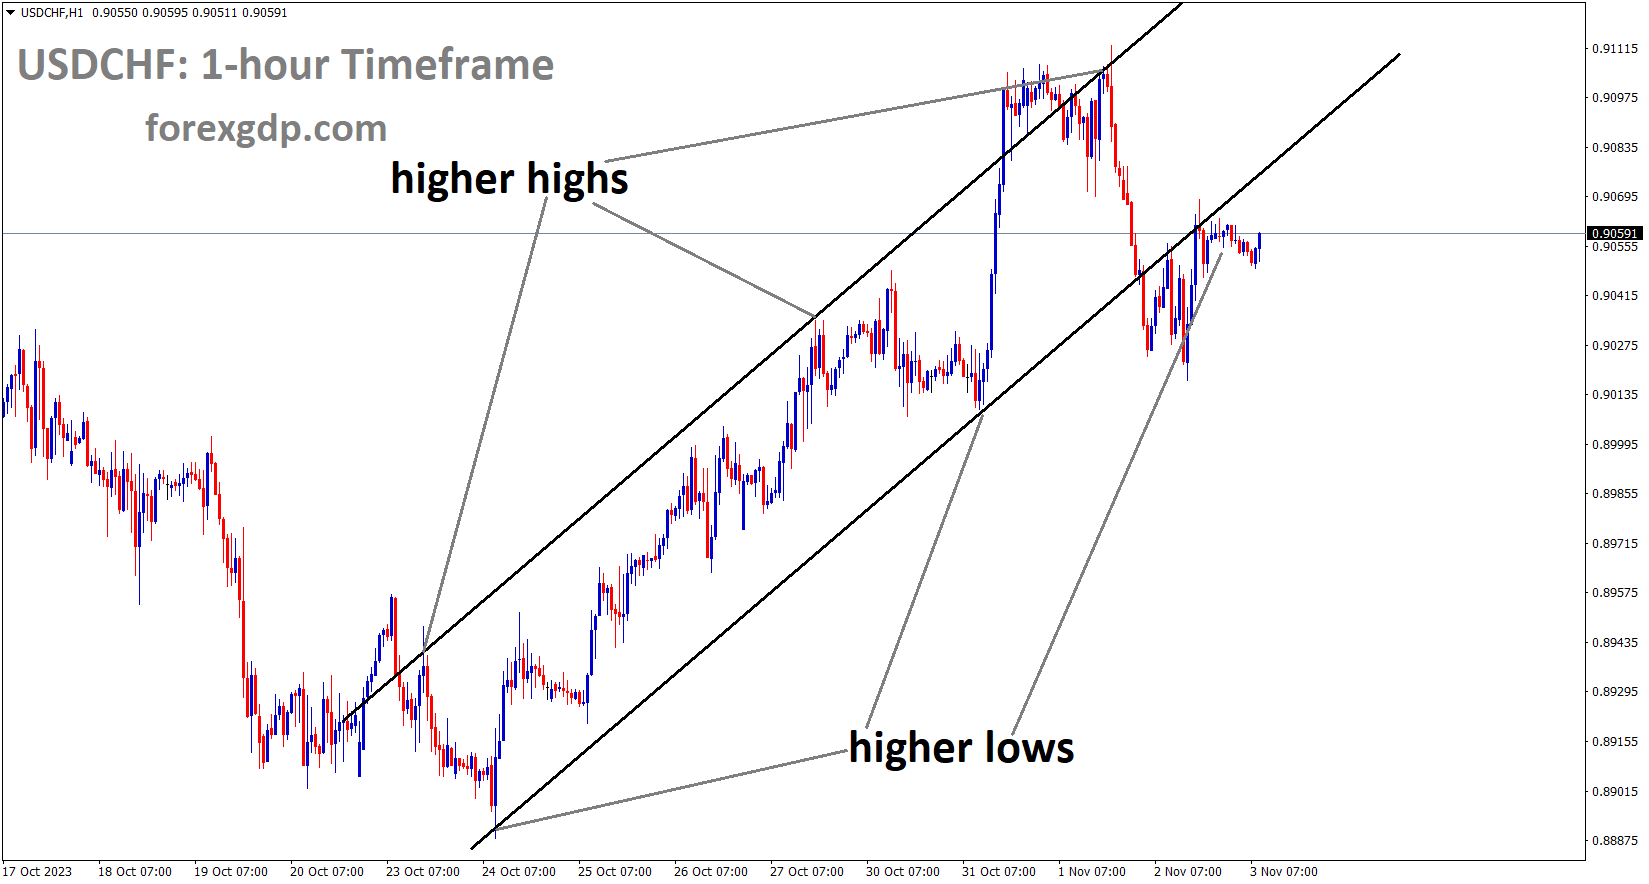 USDCHF is moving in an Ascending channel and the market has rebounded from the higher low area of the channel